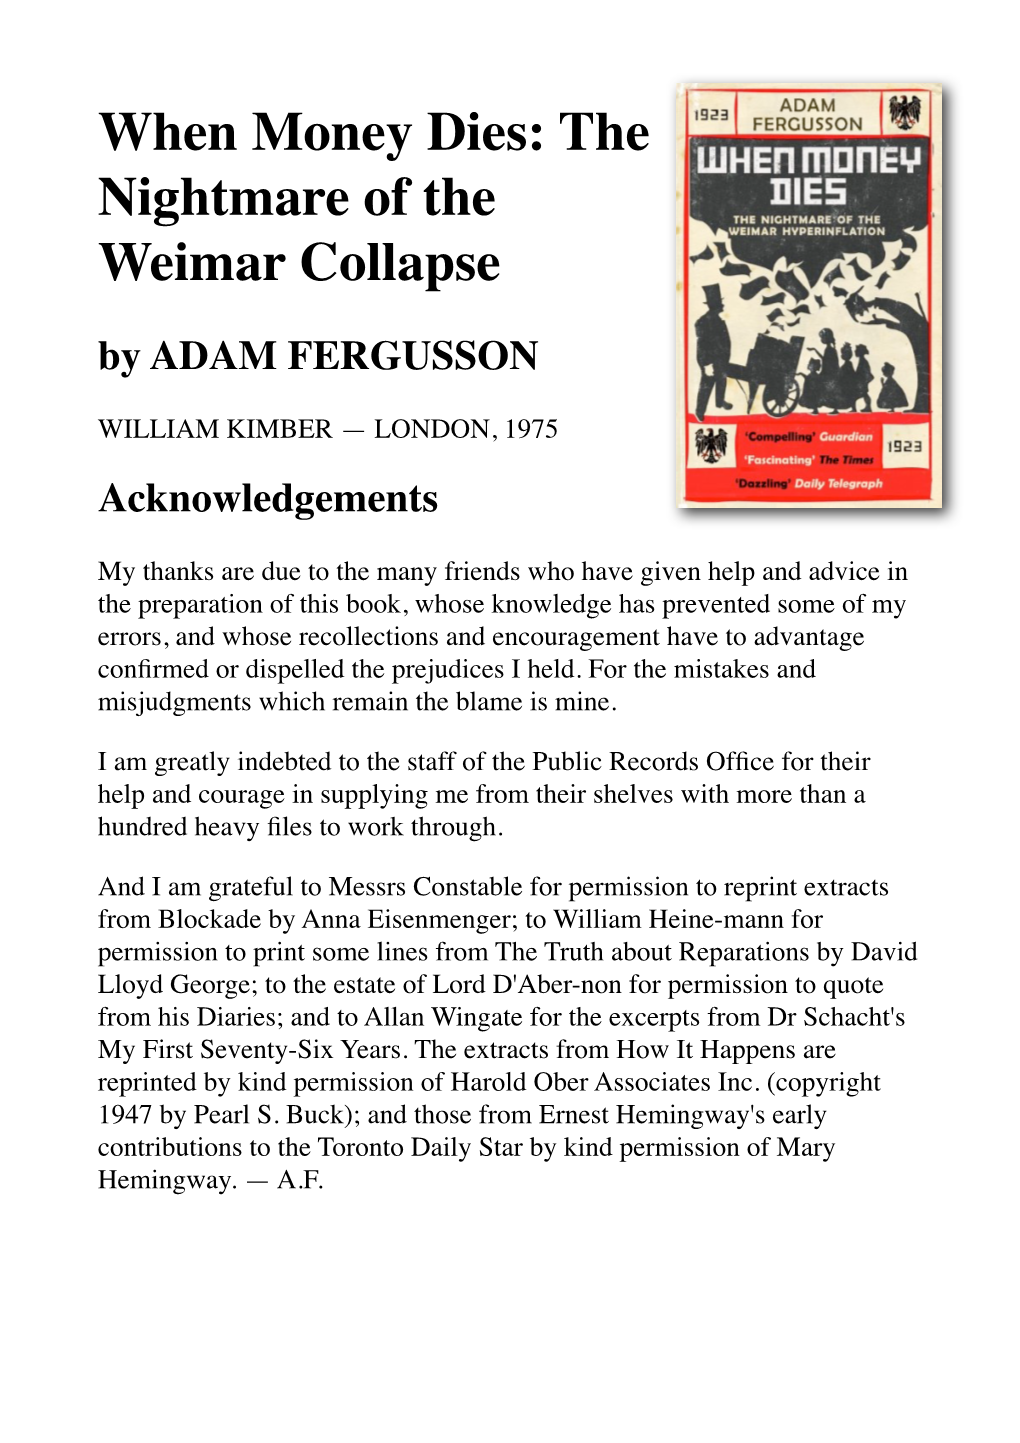 When Money Dies: the Nightmare of the Weimar Collapse by ADAM FERGUSSON